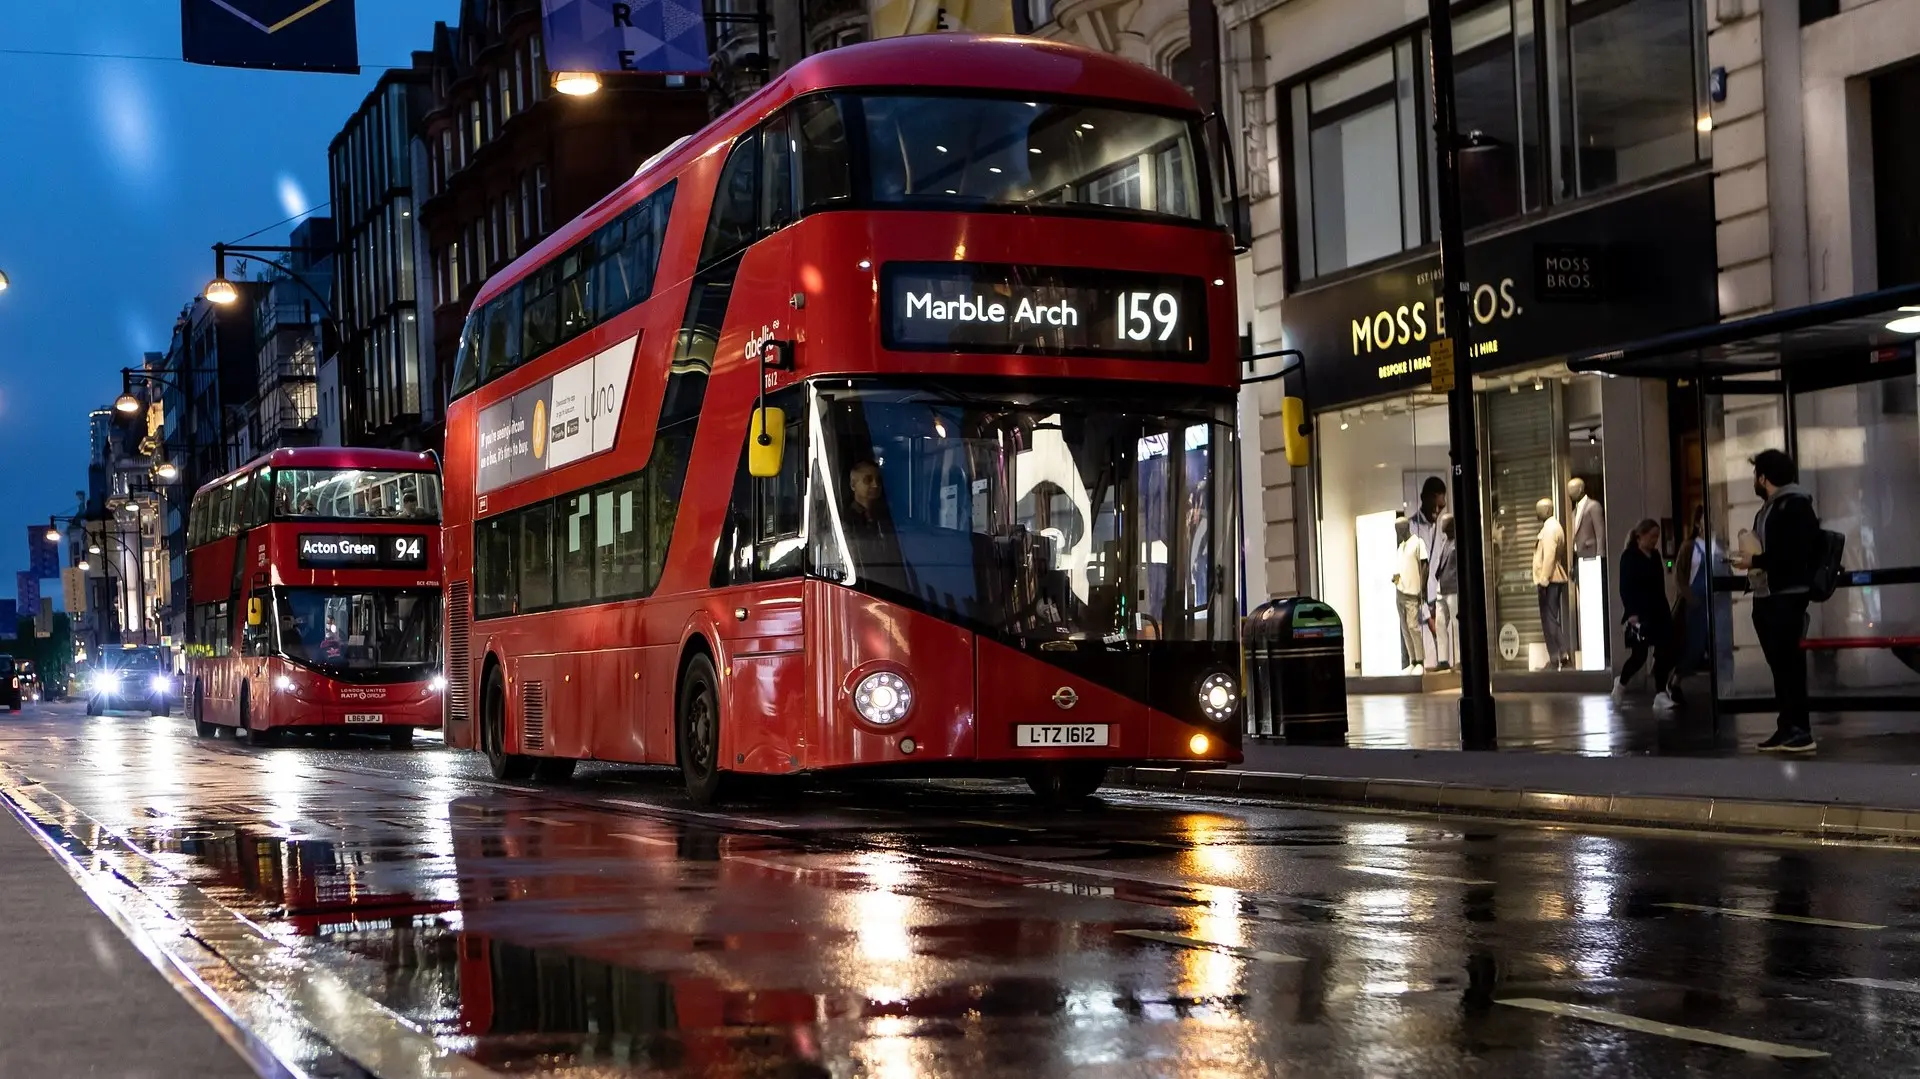 The iconic red london bus on Oxford Street